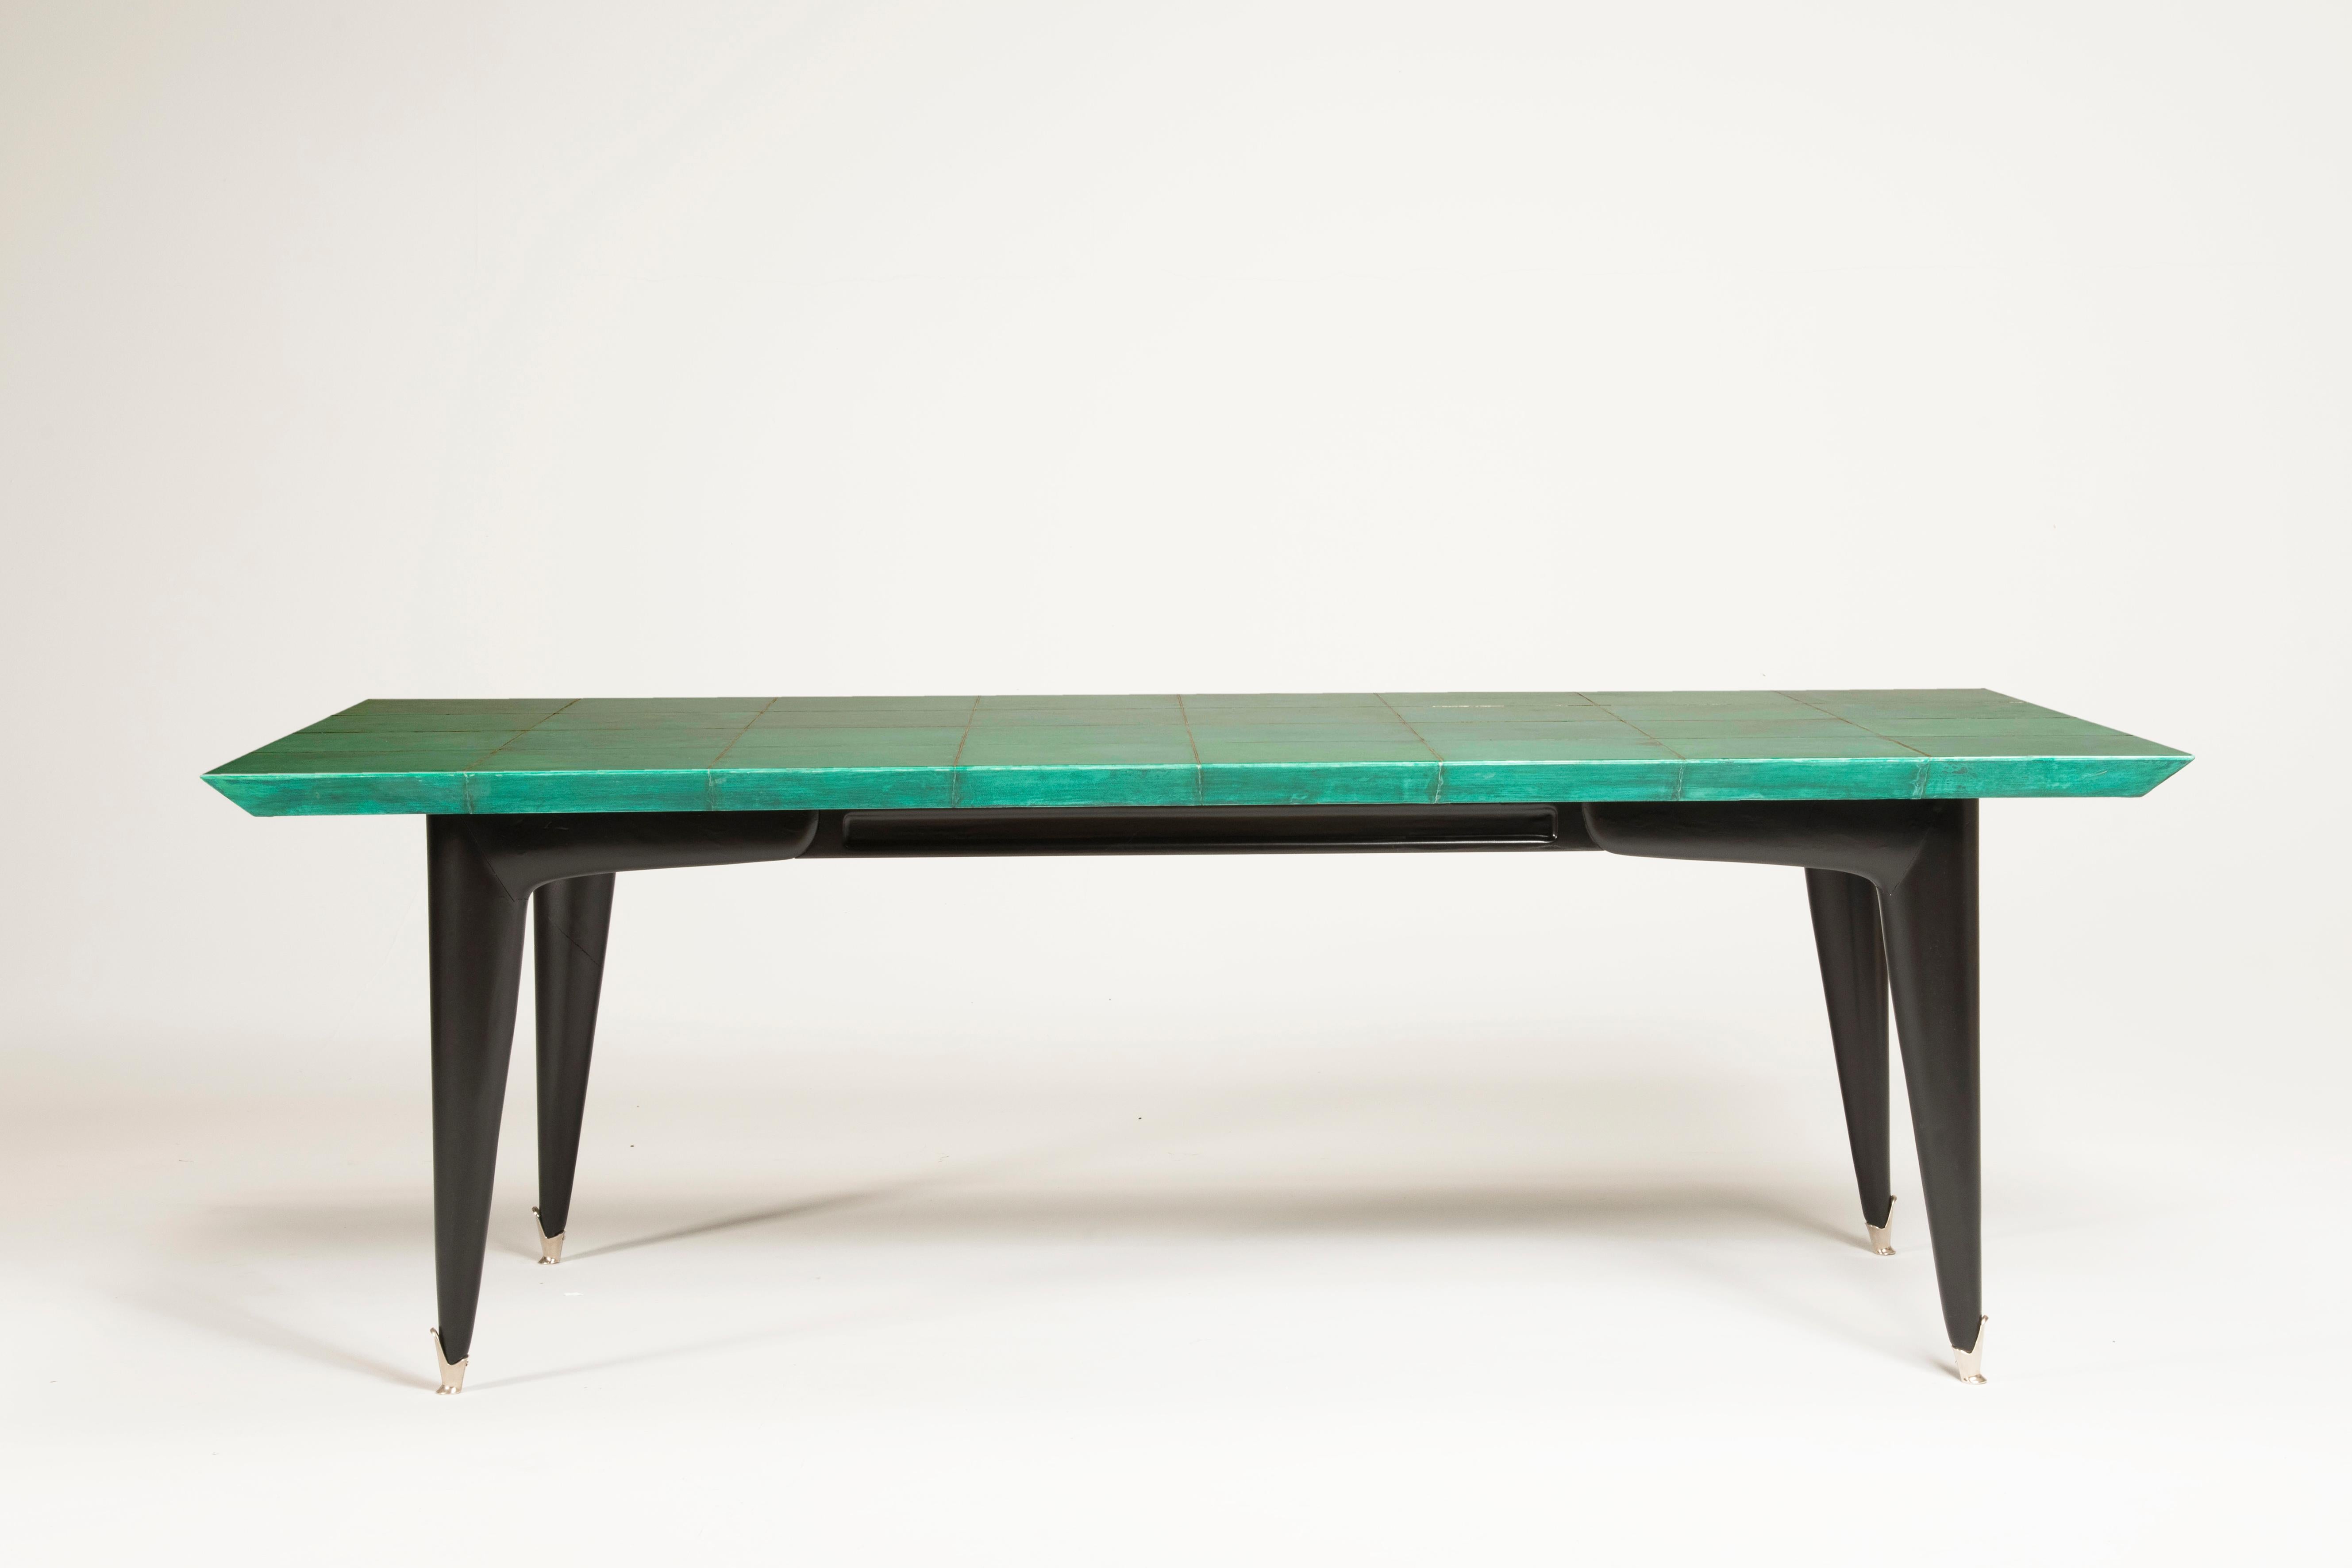 Rectangular table with top made of Emerald goatskin paneled with silver nichel metal lines. The kind of goatskin and its color are typical of Aldo Tura works. Size of the table: L 220 x D 120 x H 72 cm. Legs are black lacquered with silver nichel